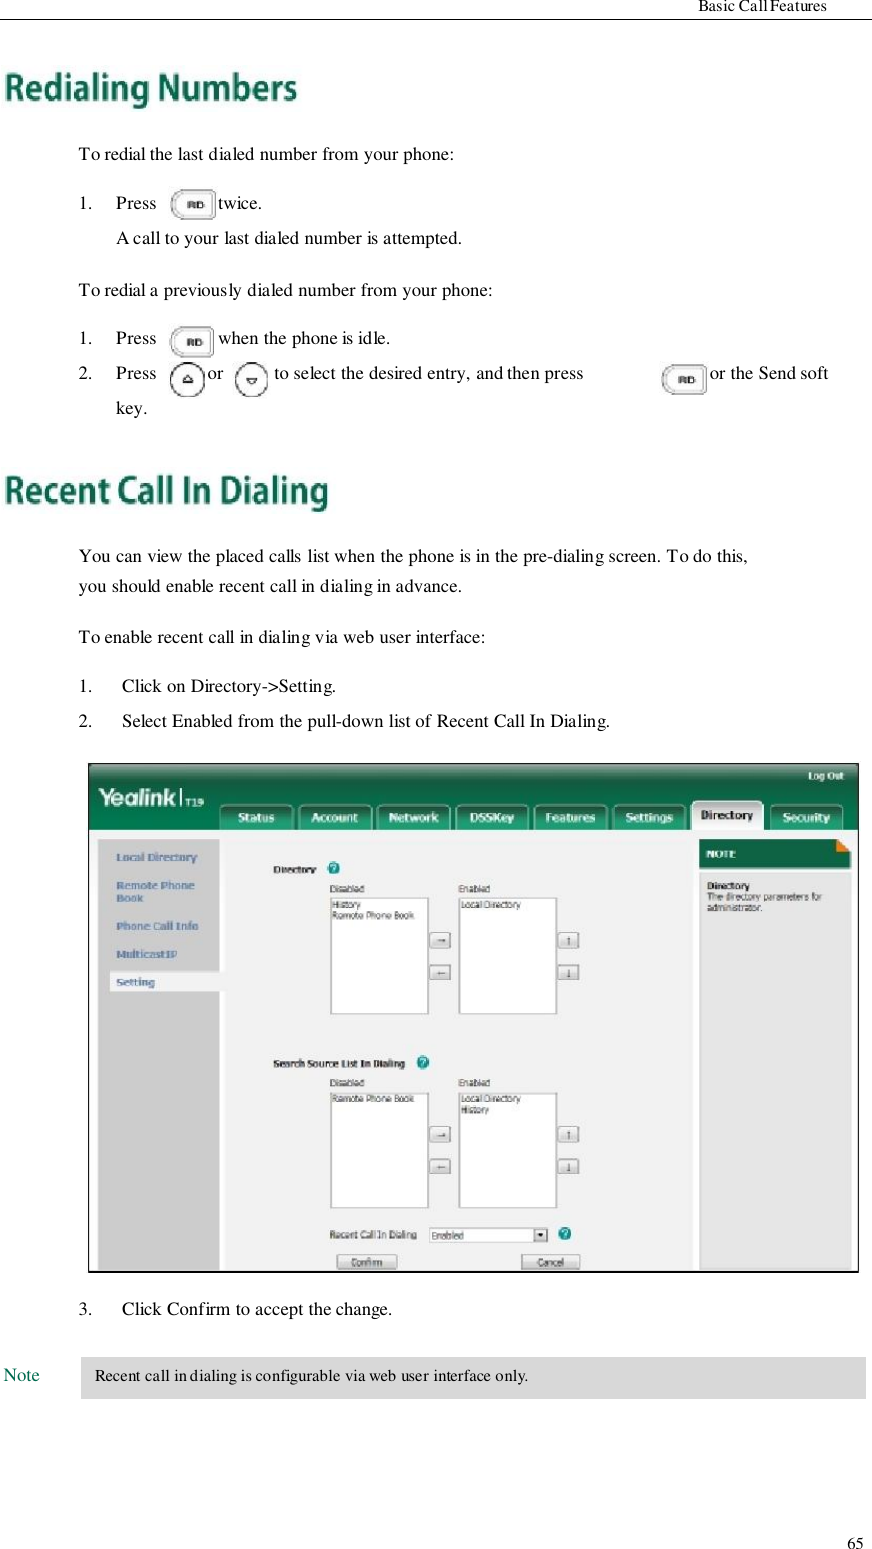                     Basic Call Features      To redial the last dialed number from your phone:  1.  Press  twice. A call to your last dialed number is attempted.  To redial a previously dialed number from your phone:  1.   Press   when the phone is idle. 2.  Press  or  to select the desired entry, and then press  or the Send soft key.      You can view the placed calls list when the phone is in the pre-dialing screen. To do this, you should enable recent call in dialing in advance.  To enable recent call in dialing via web user interface:                                   Note  1. 2.                           3.  Click on Directory-&gt;Setting. Select Enabled from the pull-down list of Recent Call In Dialing.                           Click Confirm to accept the change.   Recent call in dialing is configurable via web user interface only.                                           65